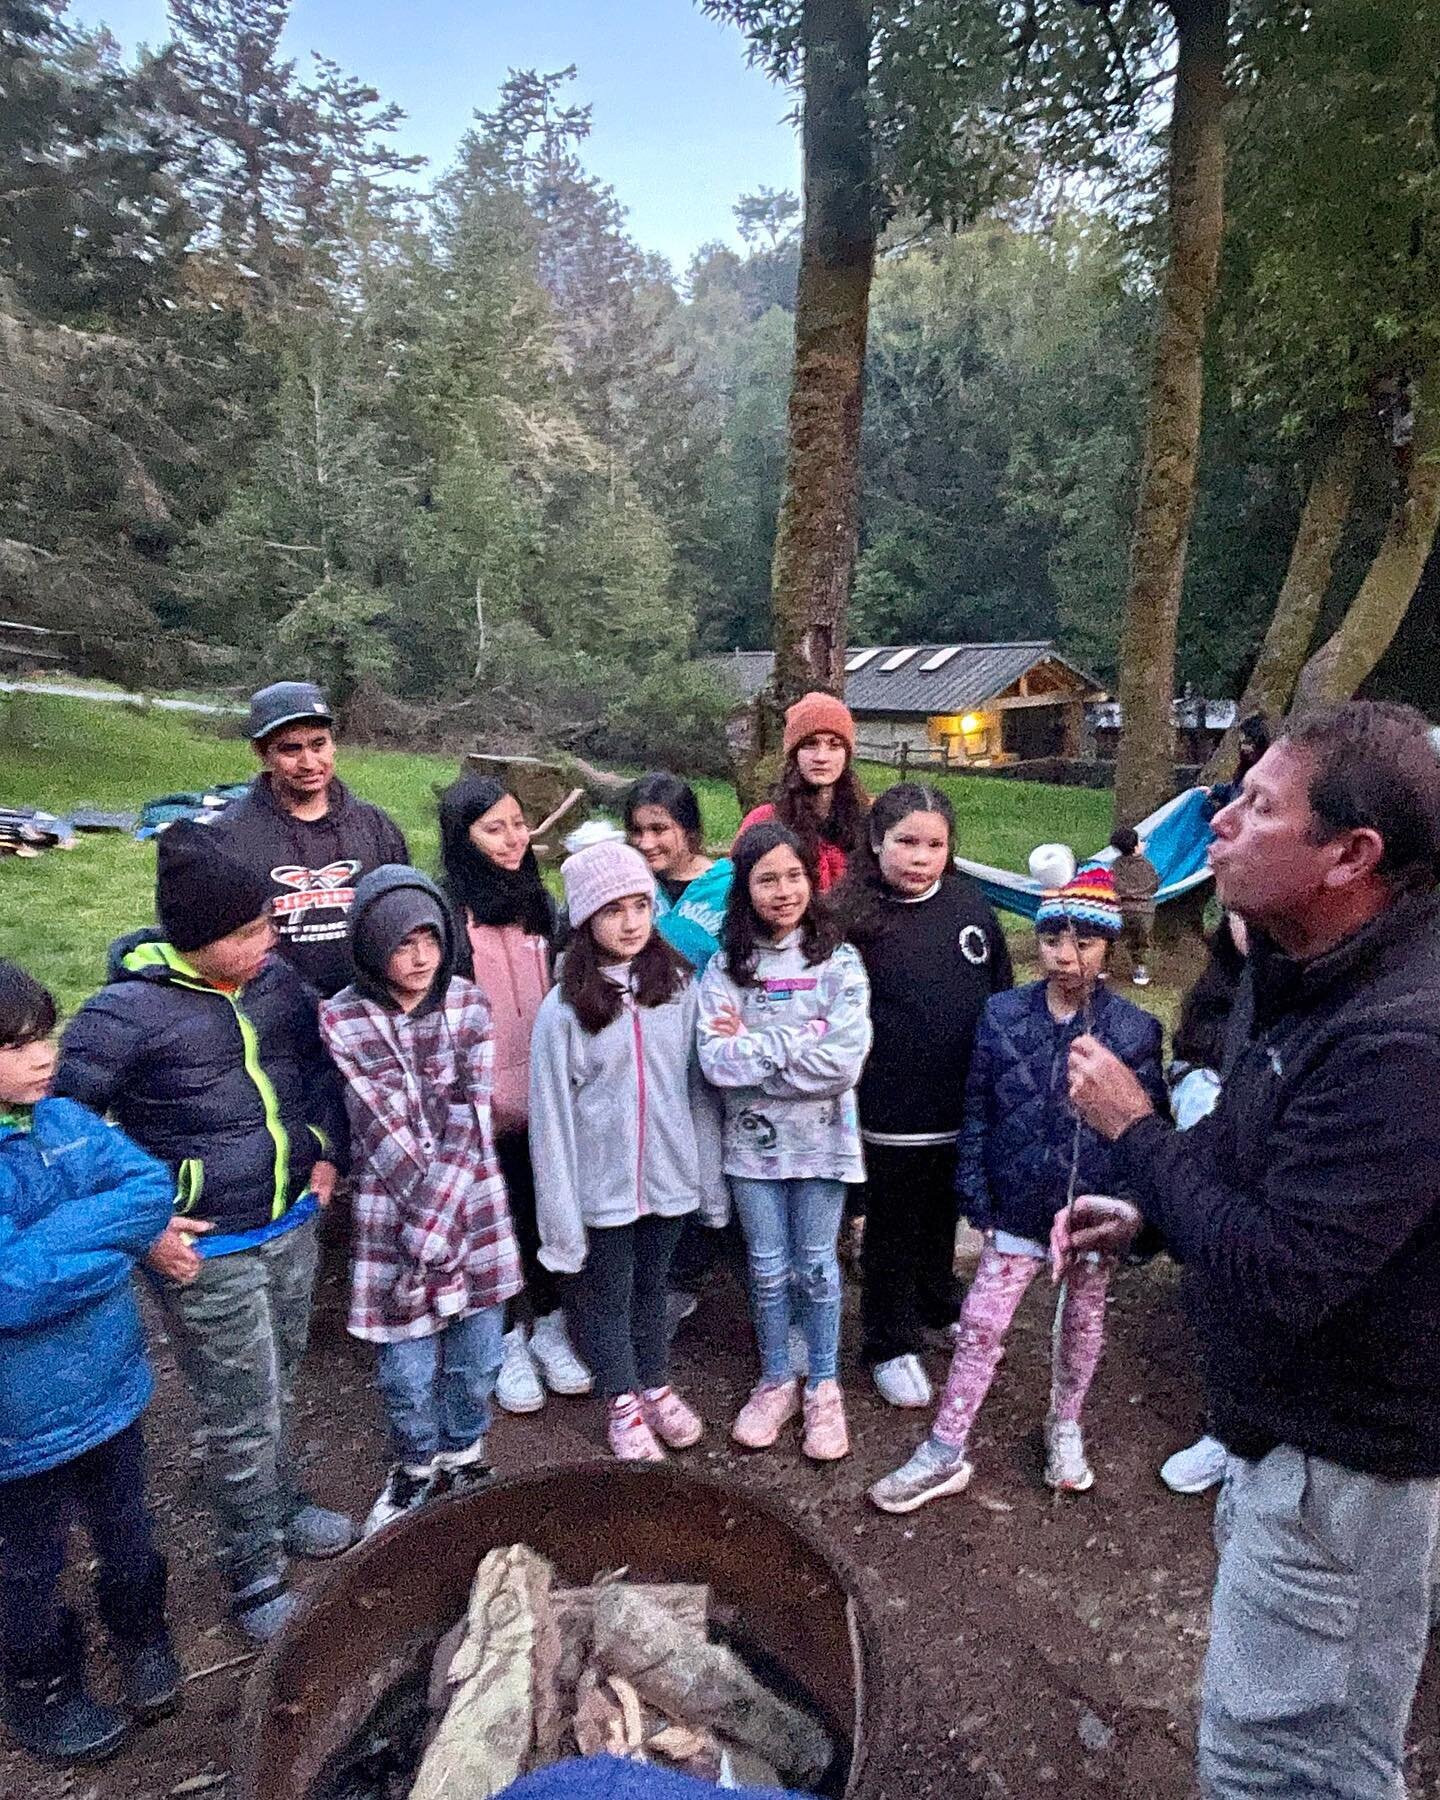 We kicked off our camping season by doing our first #adventurepass event as a recipient of the Adventure Pass Grant with @parkscalifornia. Taking @tmcollins523 4th grade class surfing at Stinson, and then for an overnight at Samuel P Taylor Park. The